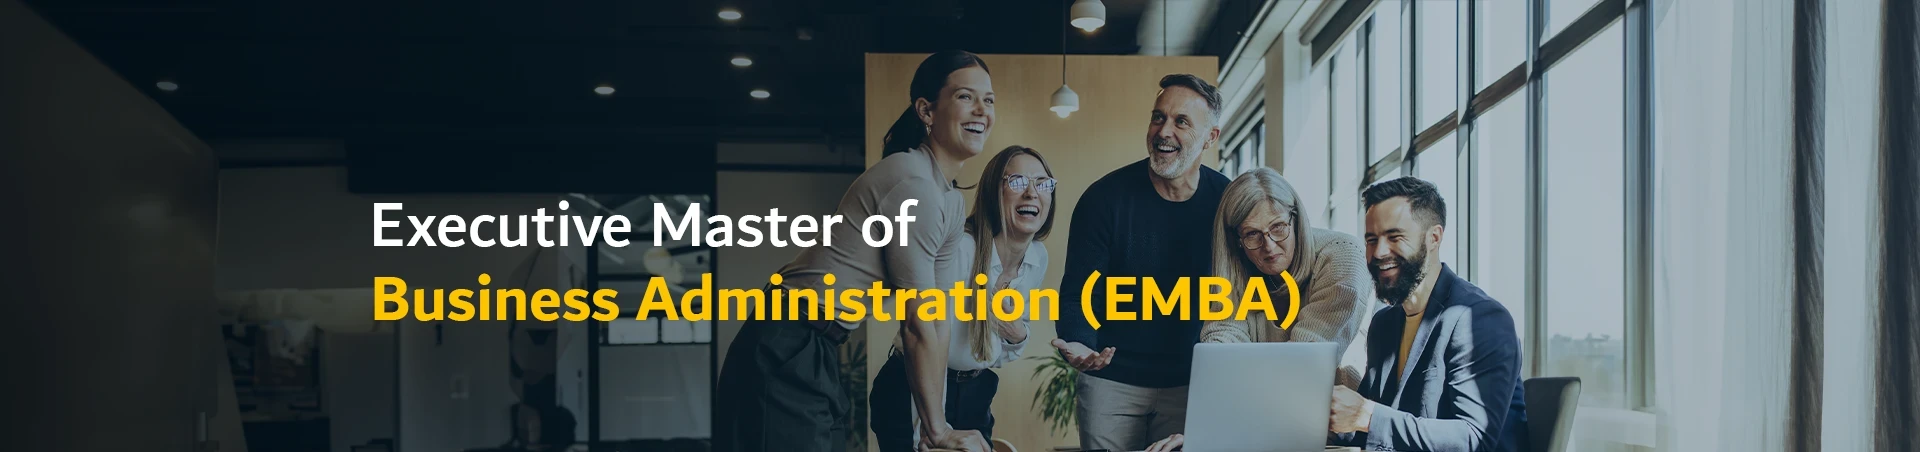 Executive Master of Business Administration (EMBA)